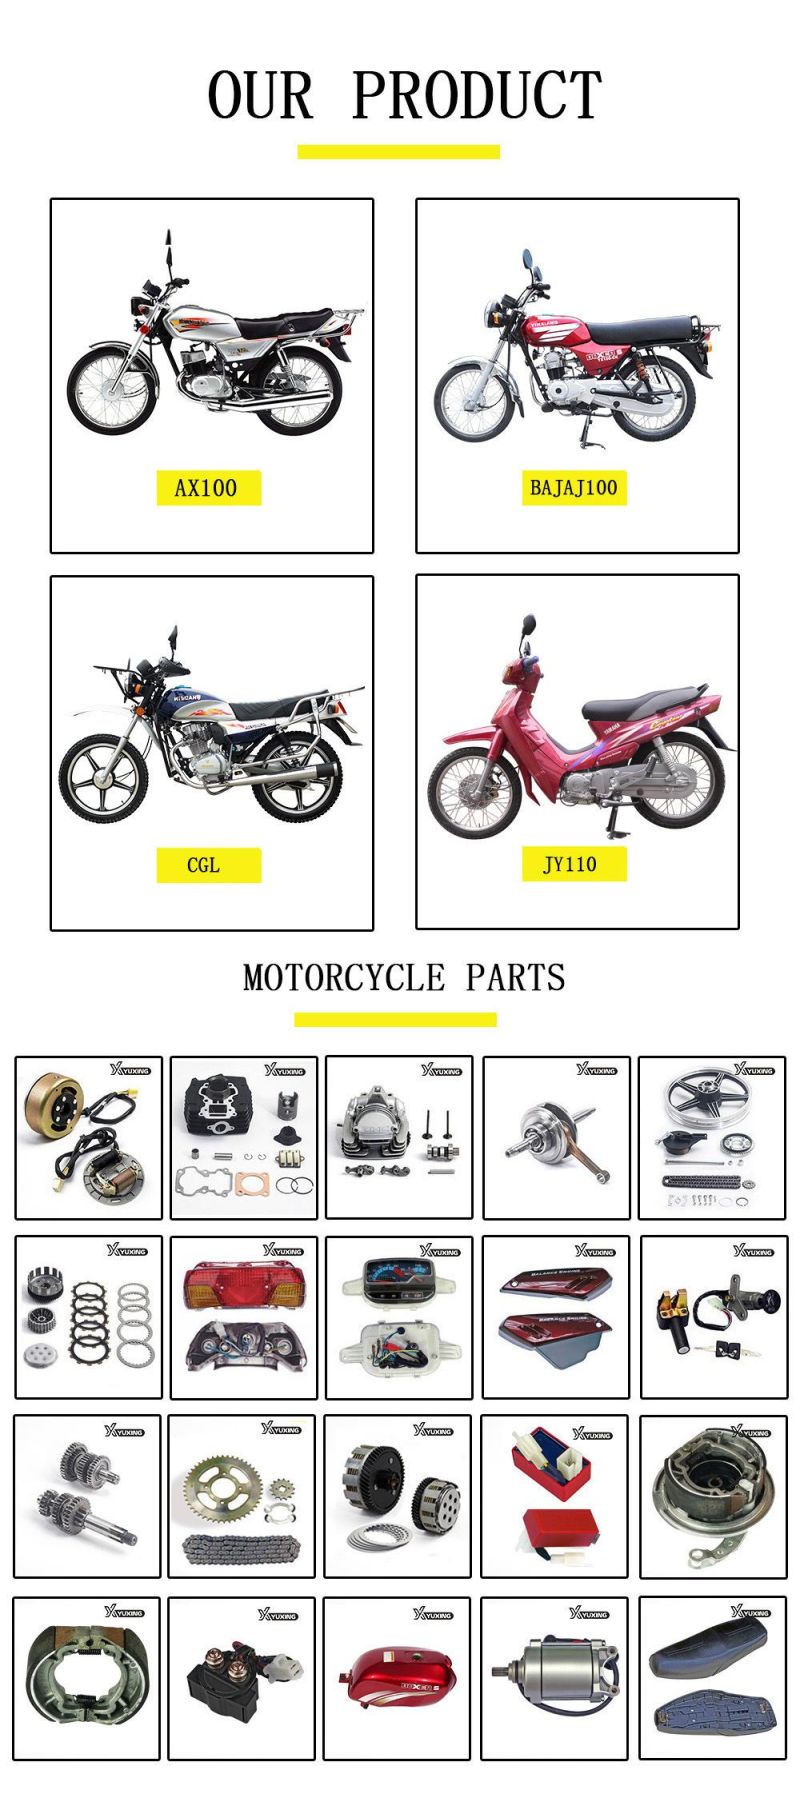 Yuxing Motorcycle Spare Parts Accessories Starting Motor